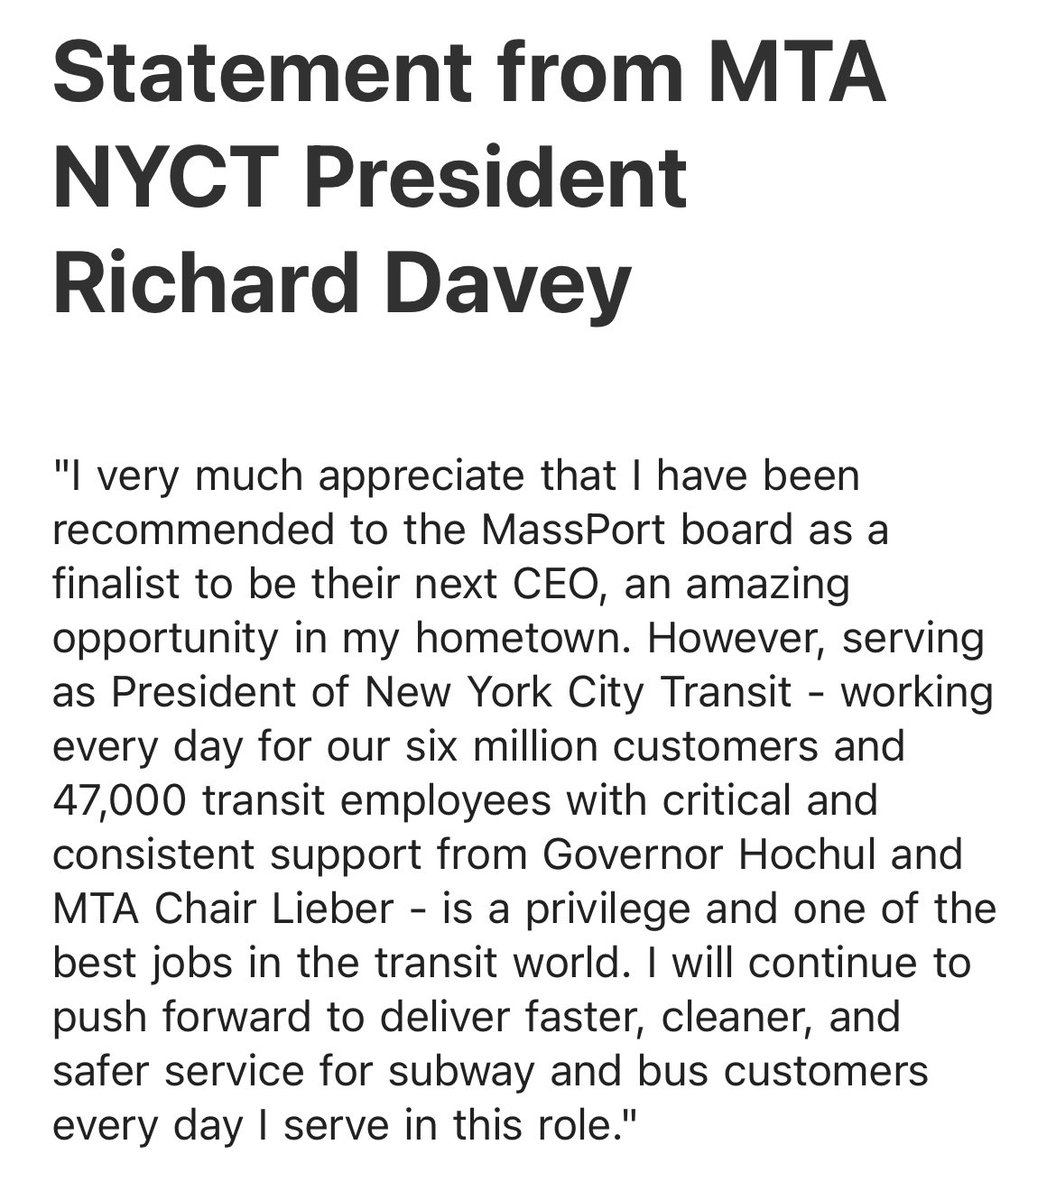 NYCT president Rich “North Star” Davey sez he’s staying at the MTA.